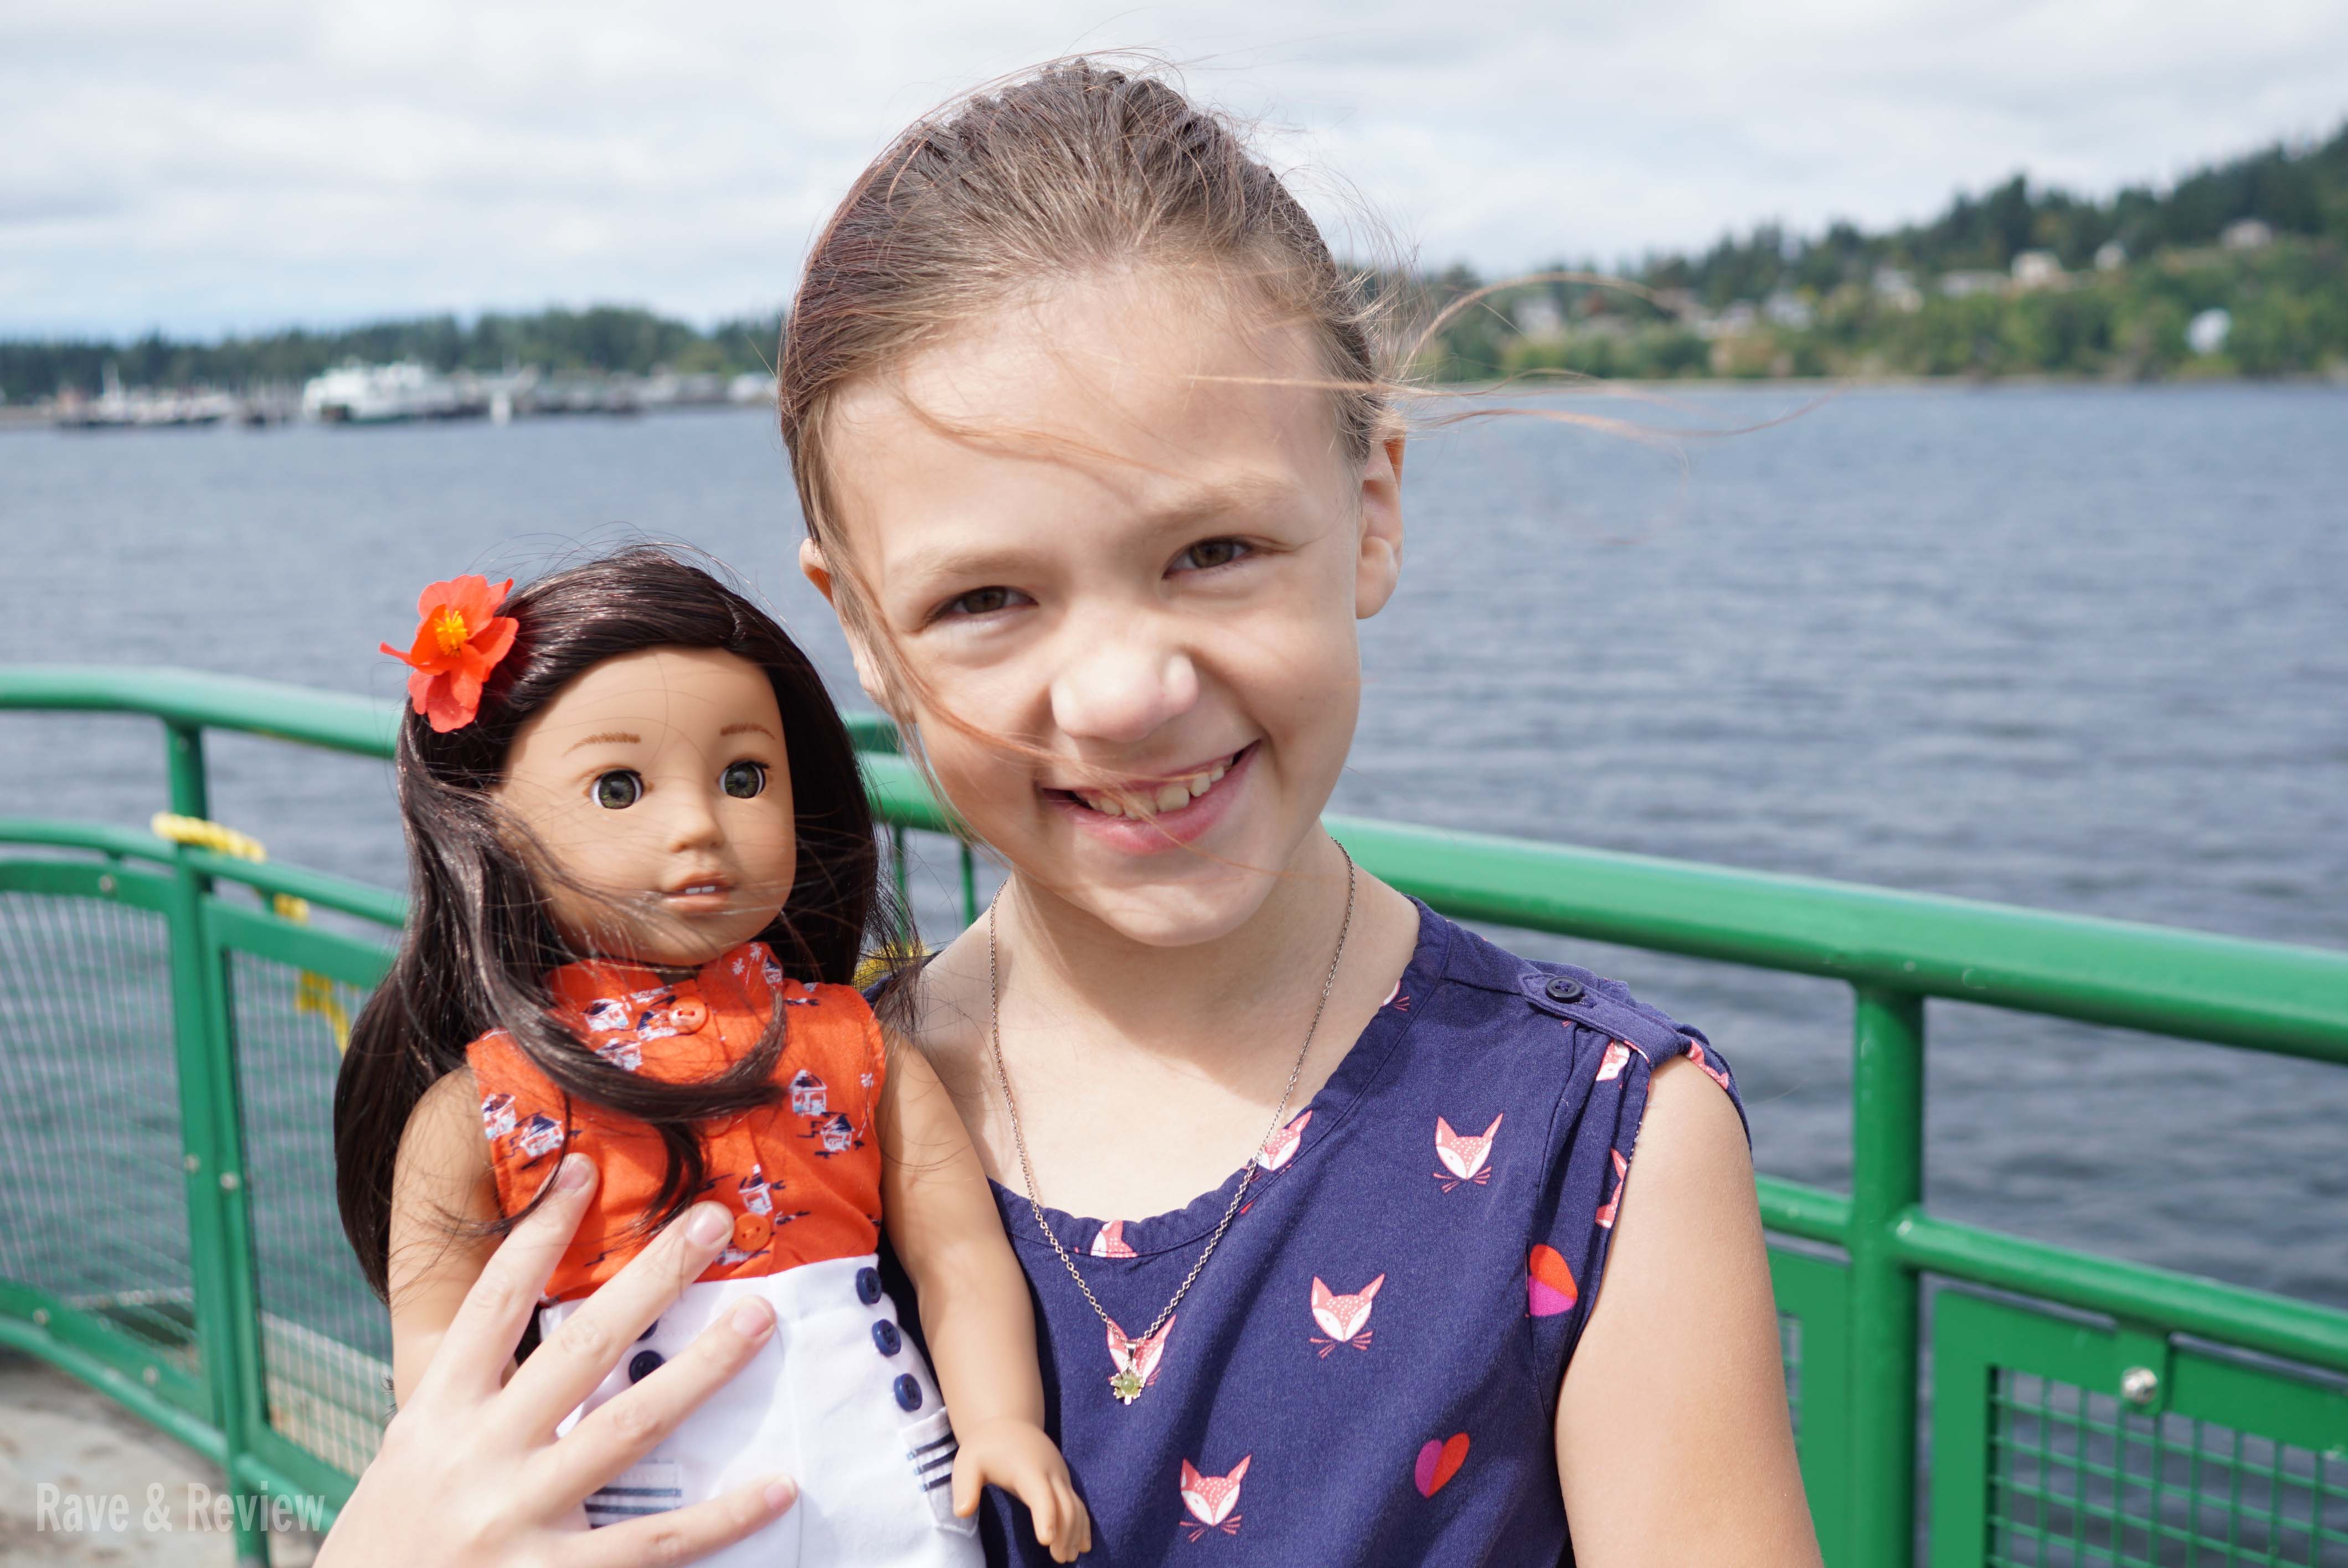 New from American Girl: the aloha spirit with Nanea Mitchell